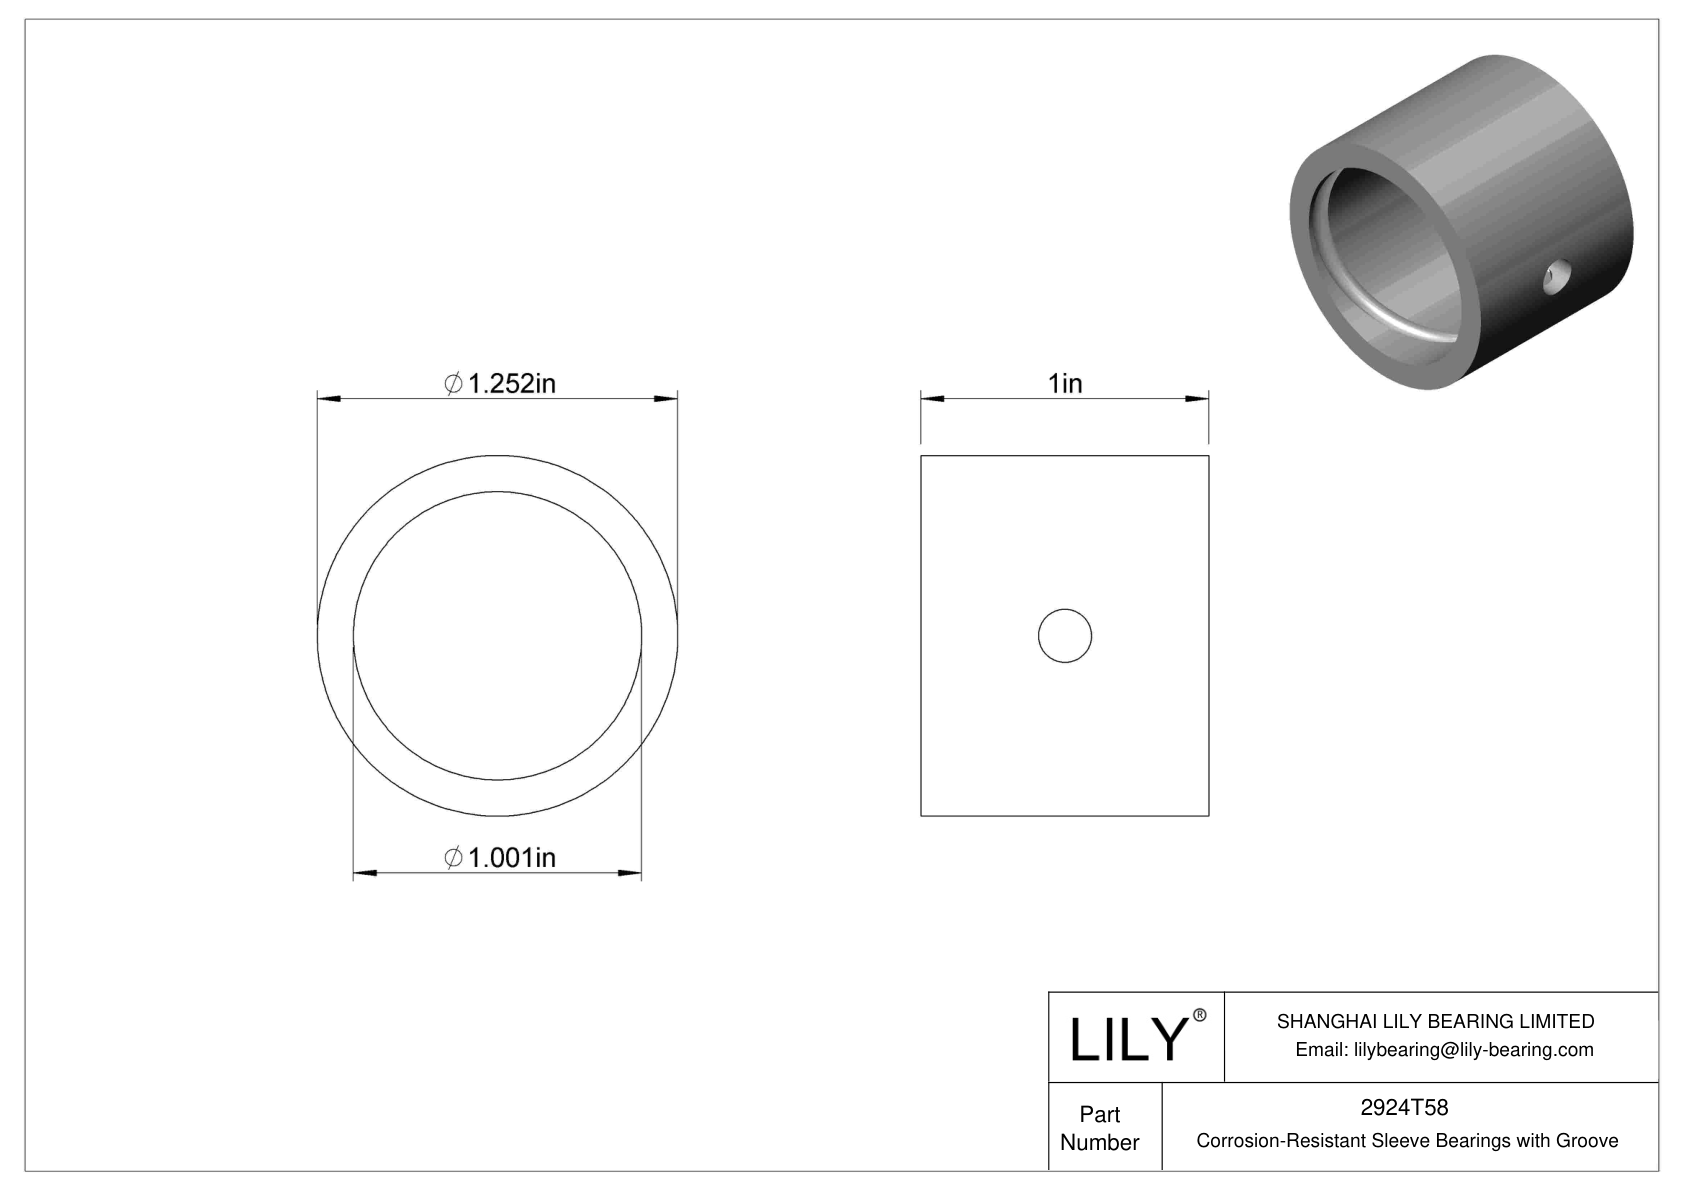 CJCETFI Corrosion-Resistant Sleeve Bearings with Groove cad drawing